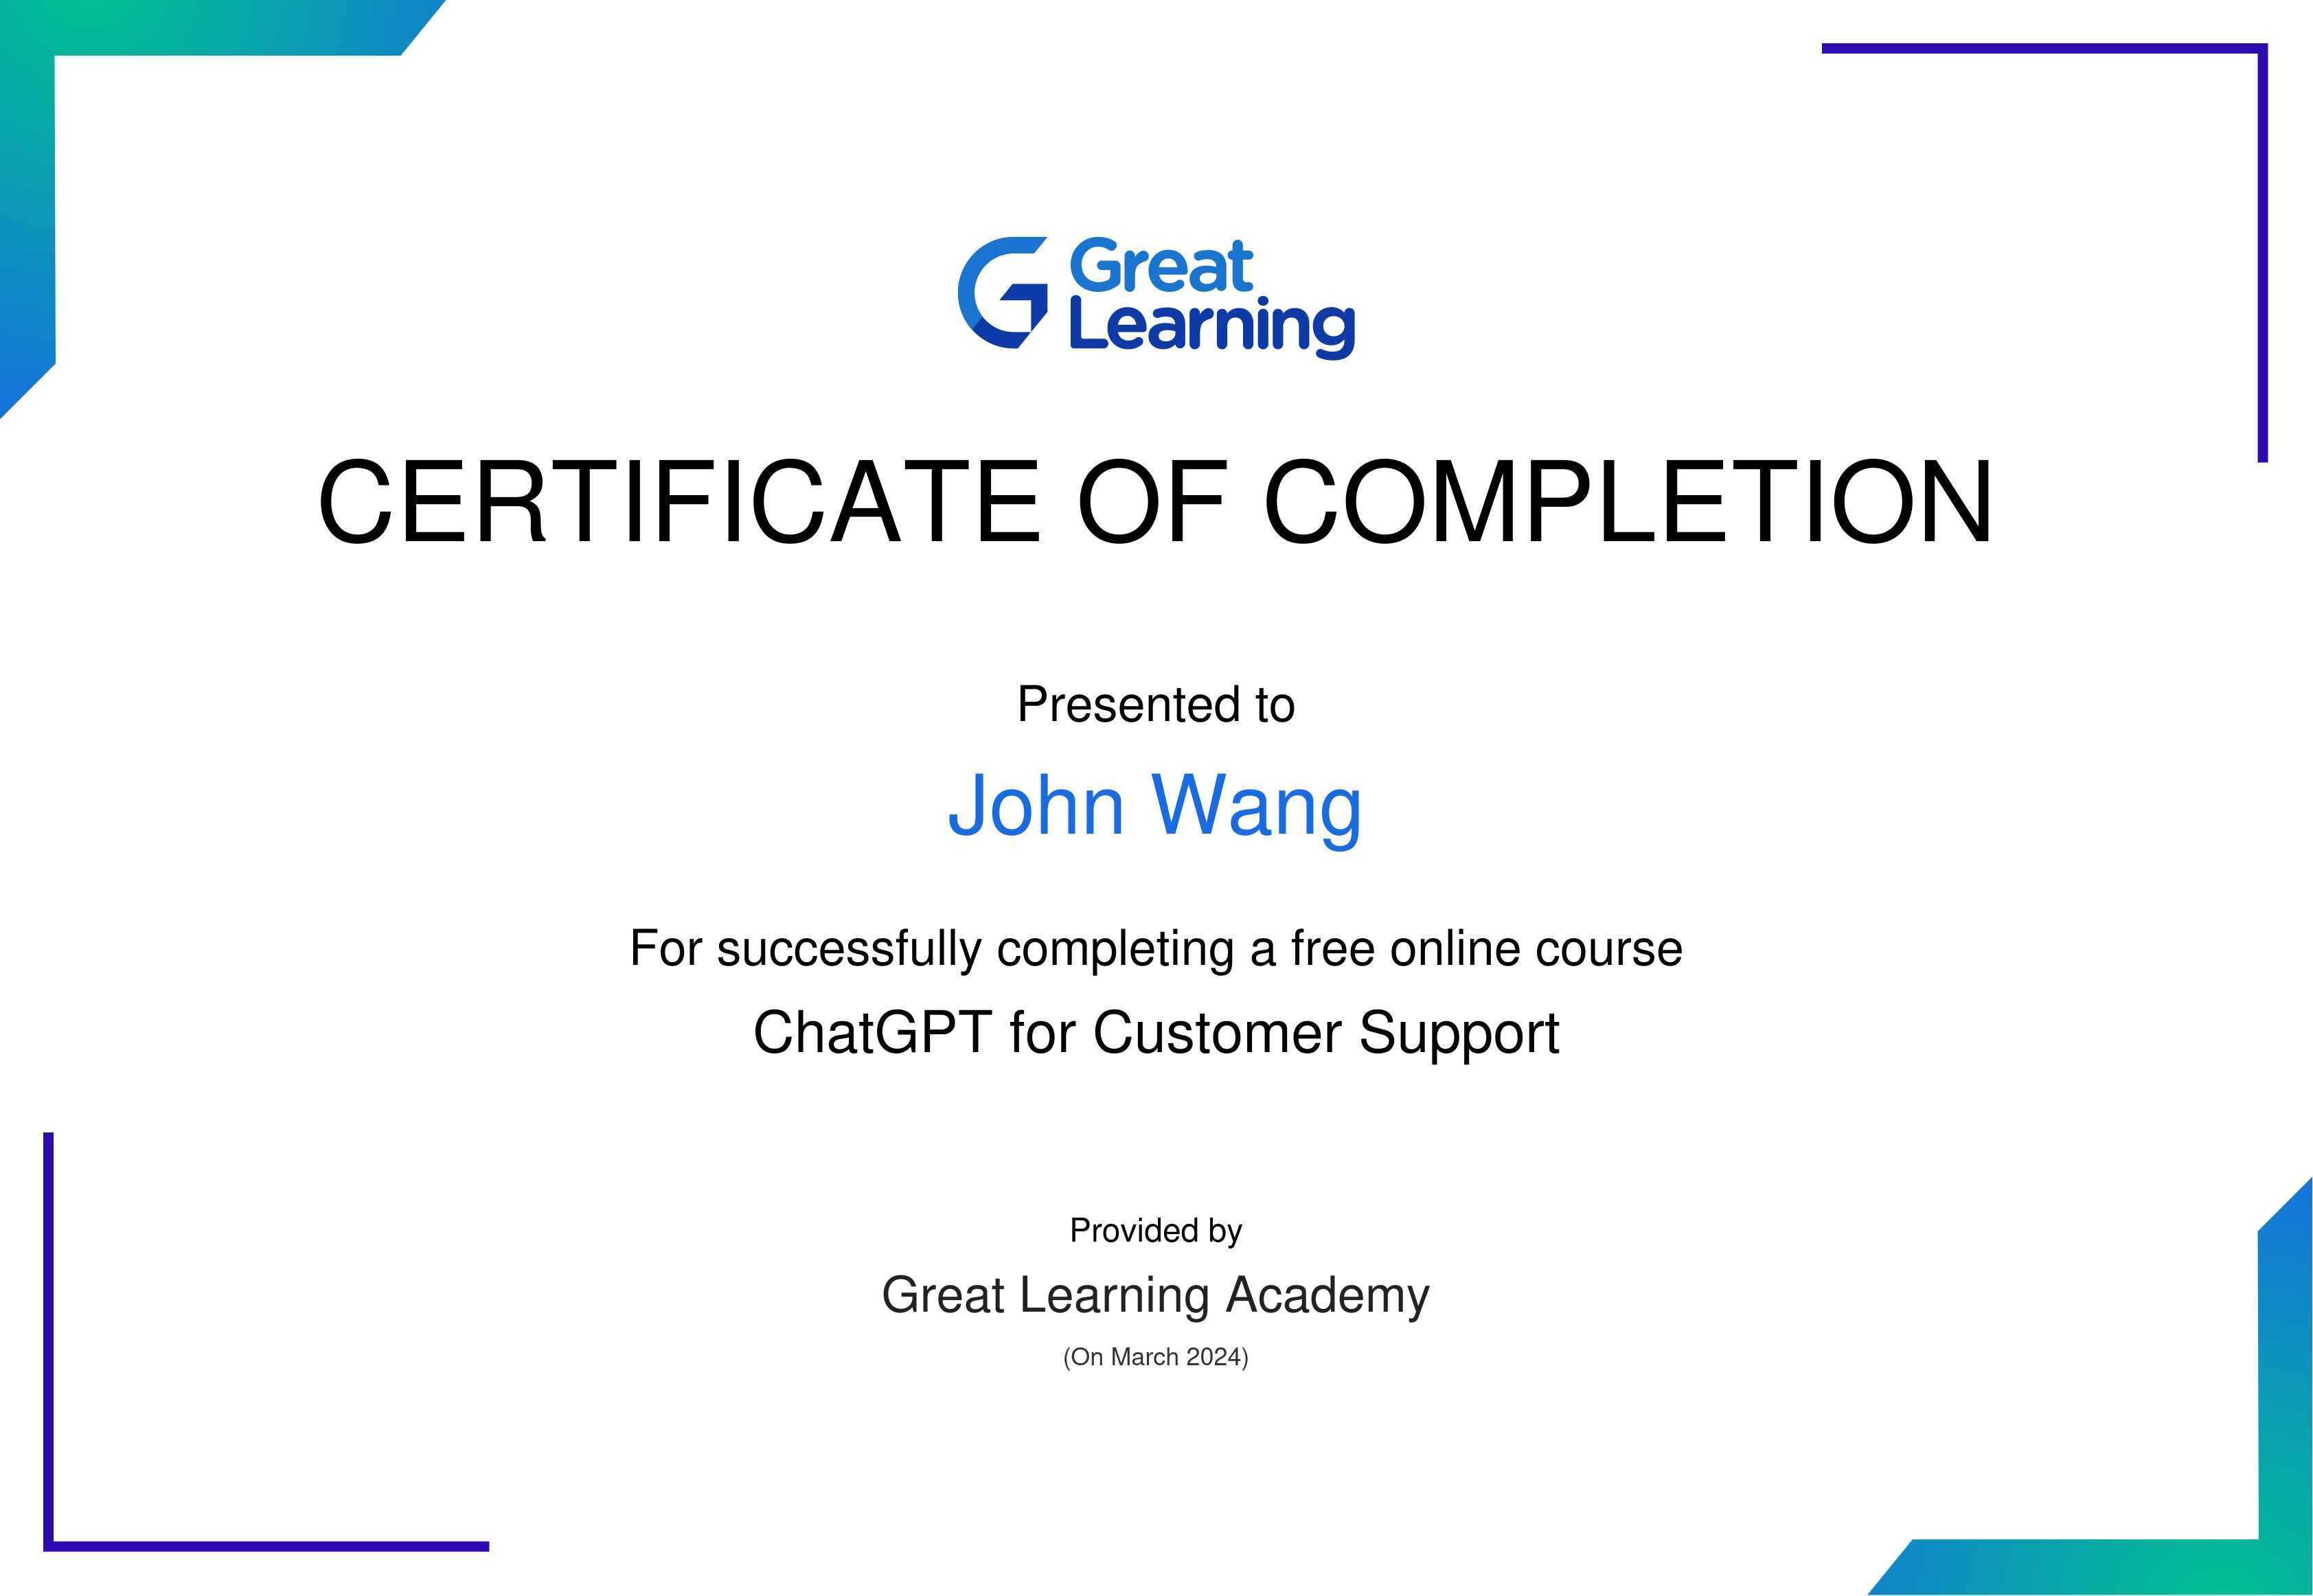 John's ChatGPT for Customer Support from Great Learning Academy by Shantnu Rana